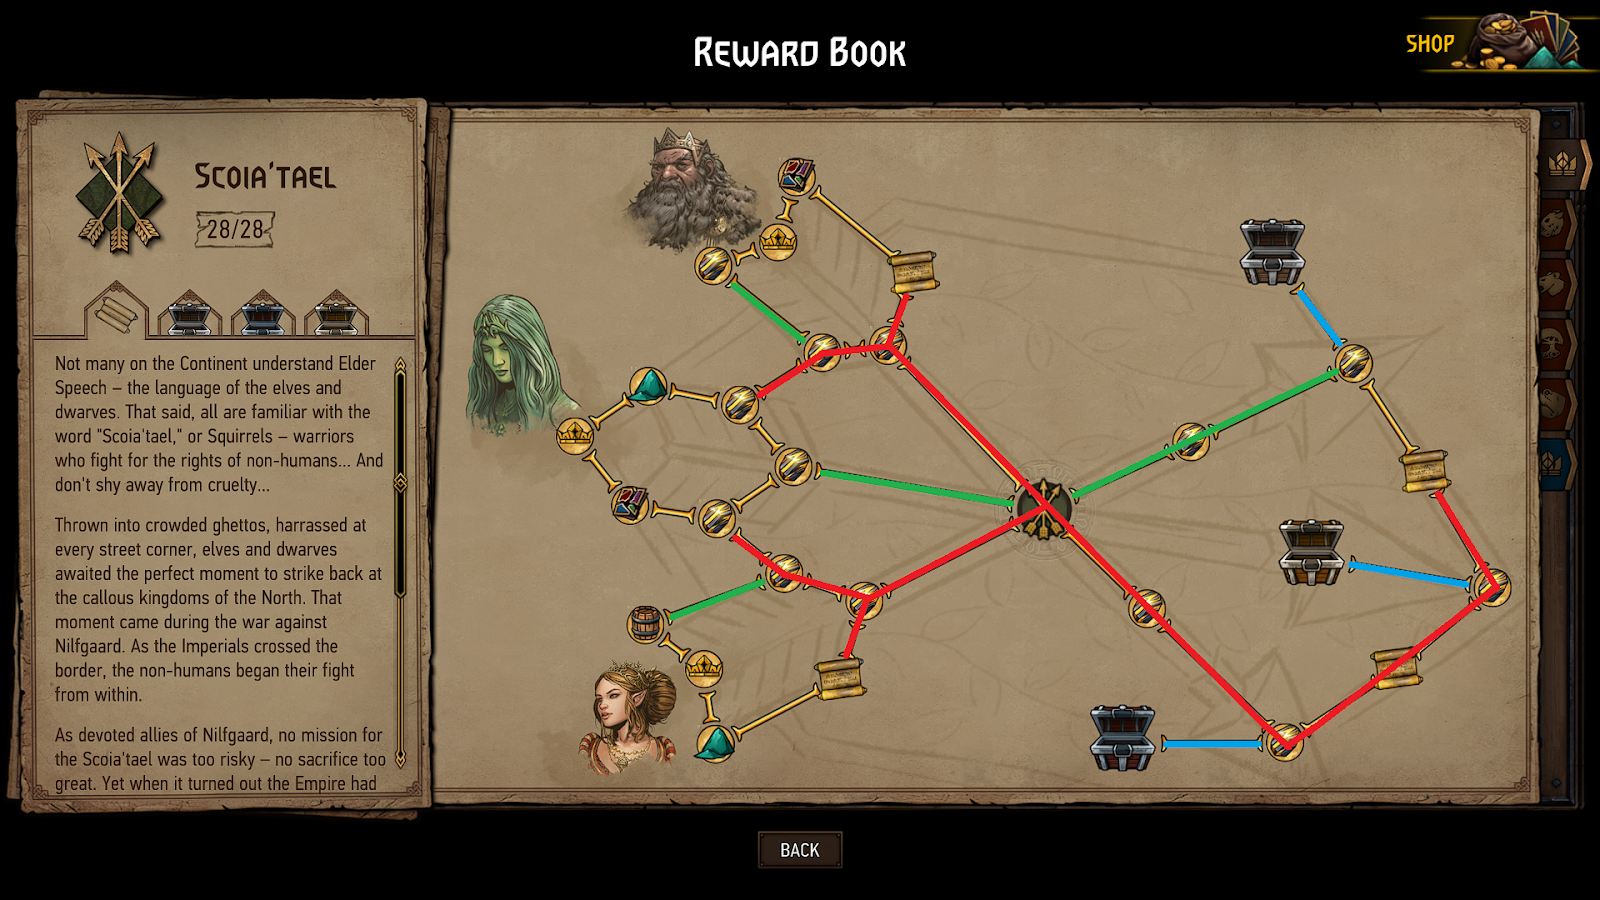 The different routes are shown in red, blue and green on the reward tree for the Scoia'tael